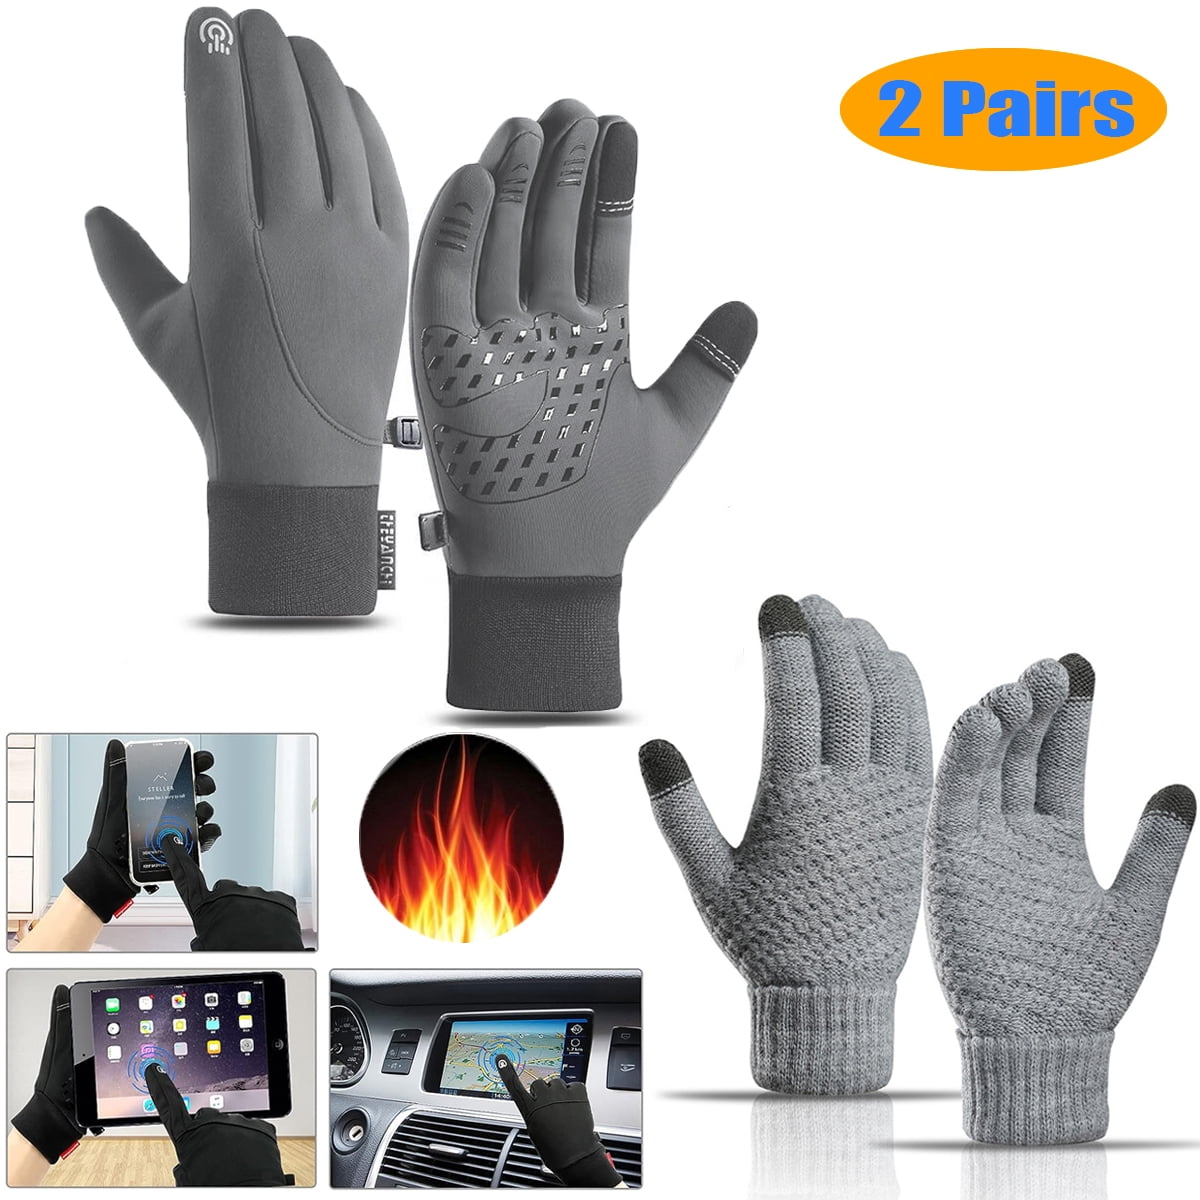 AG338 Ice Breaker Thermal Plus Insulated Double-Dipped Gloves - 4 Pair Pack